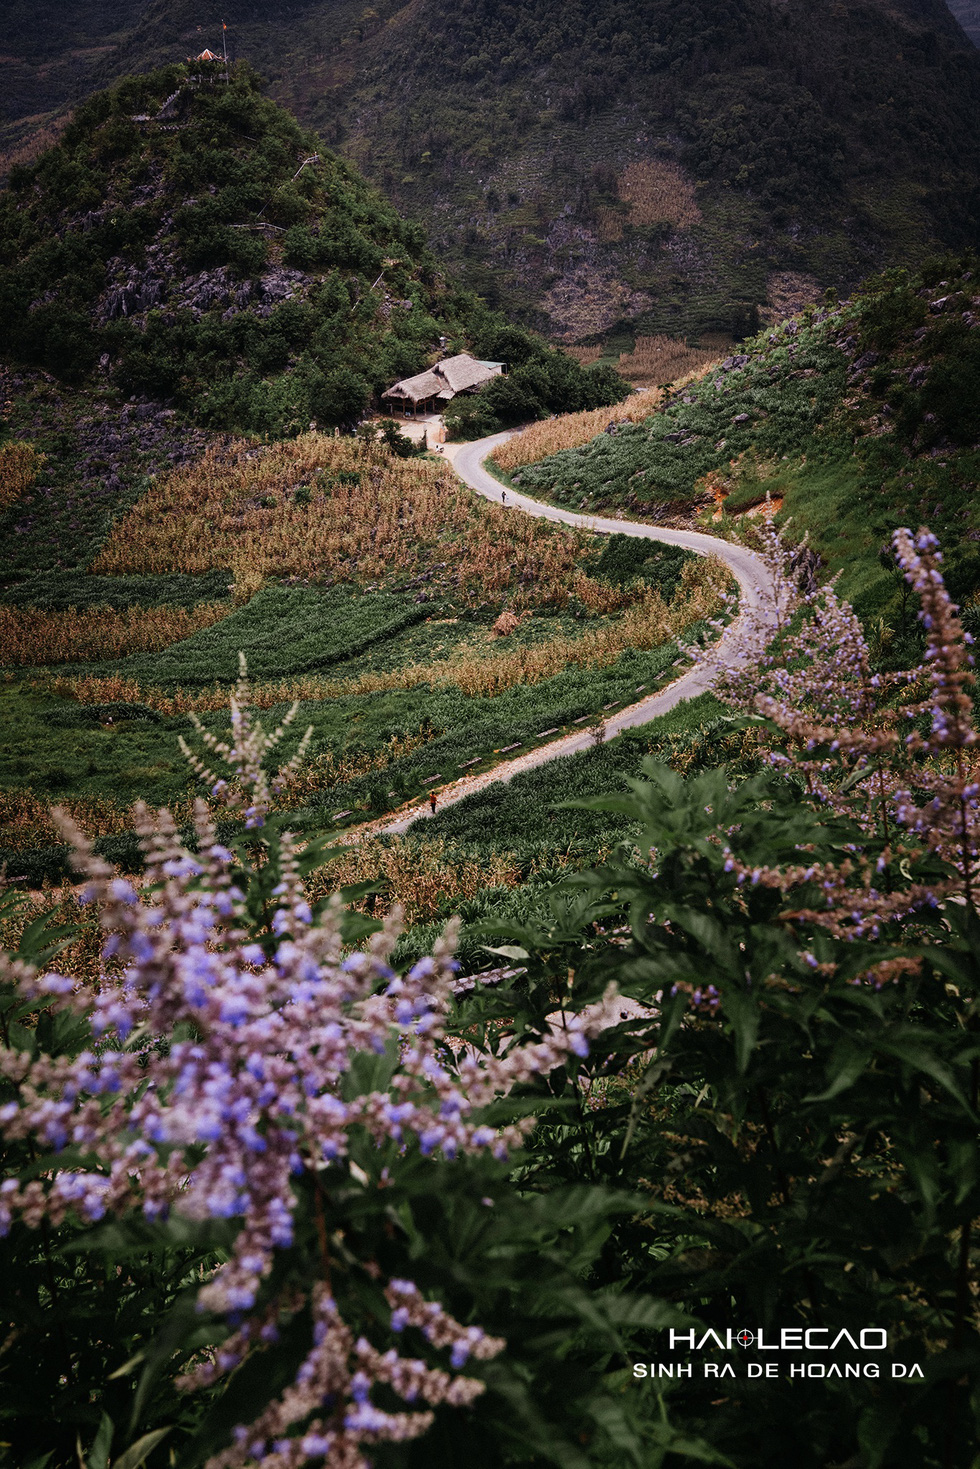 Ha Giang transforms into colorful and romantic wonderland in September, when buckwheat flower, brassica napus and wild sunflowers bloom. Photo: Hai Le Cao / Tuoi Tre